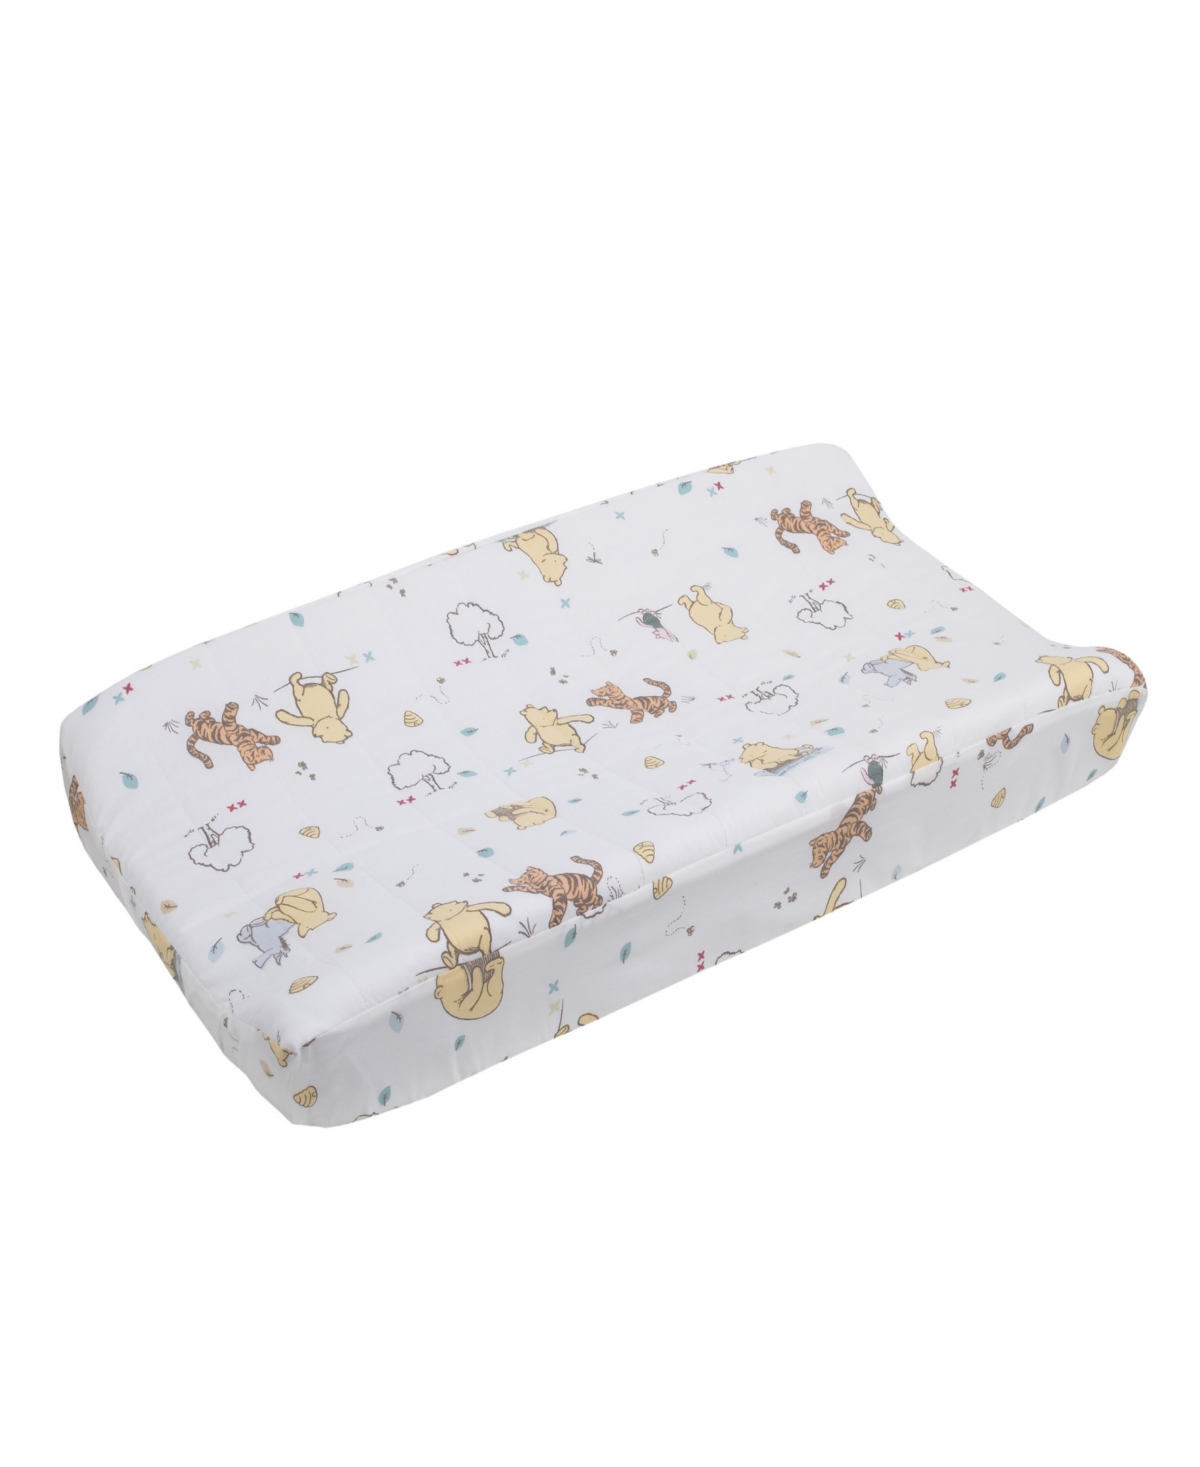 DISNEY CLASSIC WINNIE THE POOH QUILTED CHANGING PAD COVER BEDDING